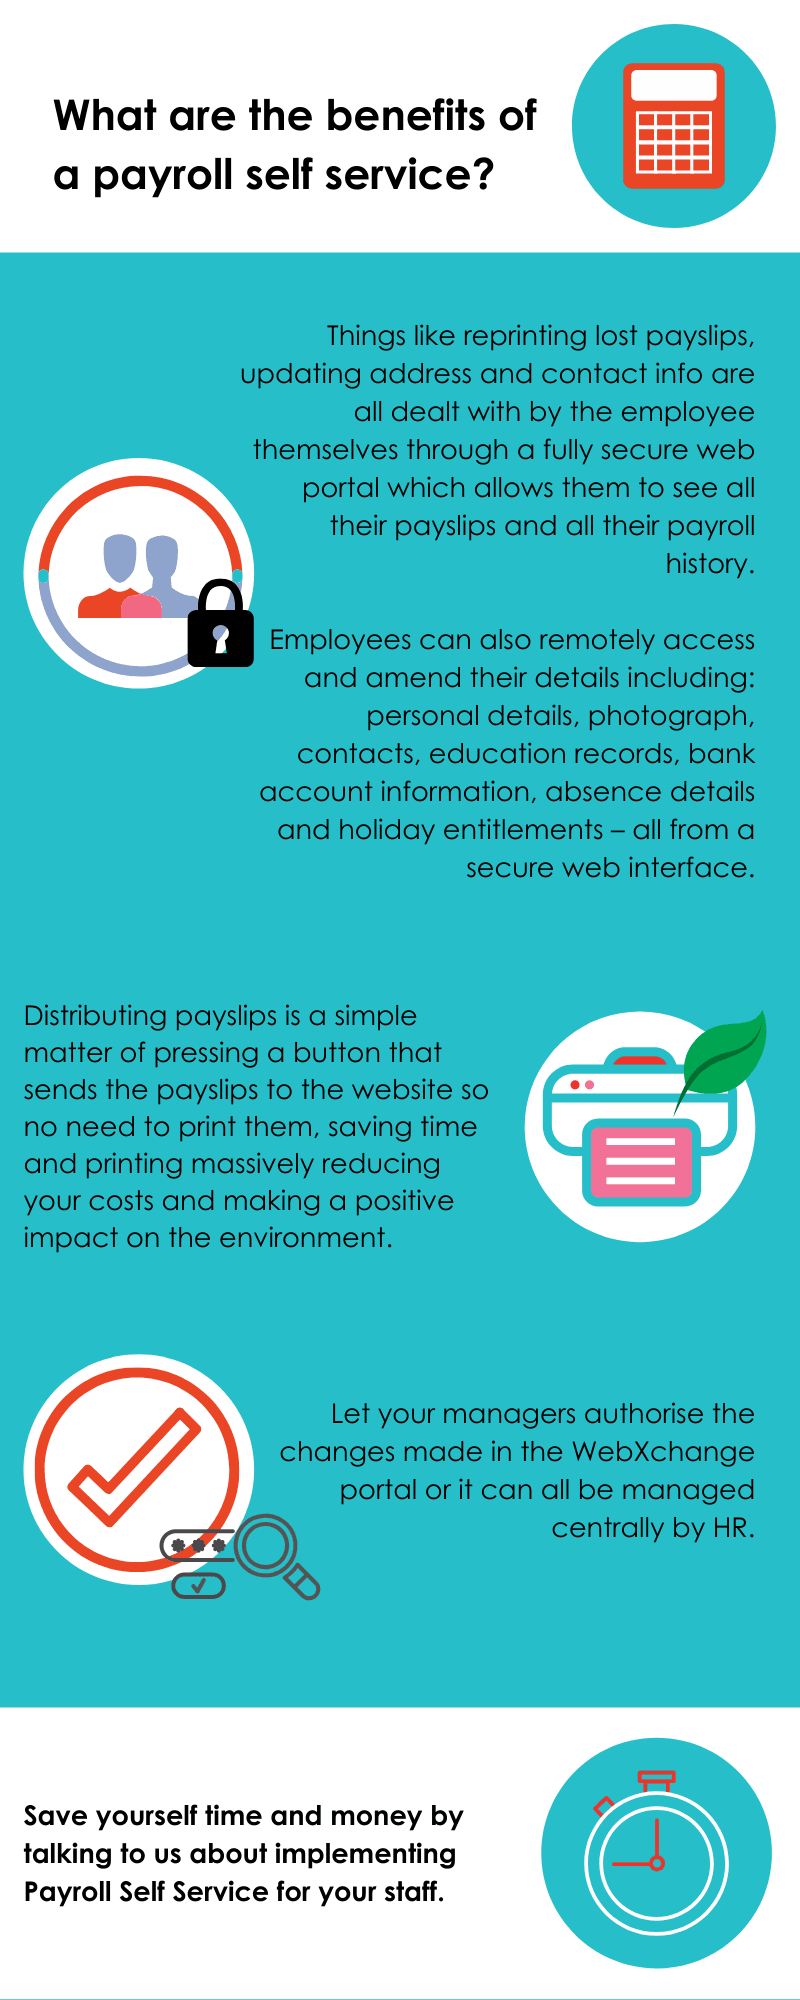 What are the benefits of a payroll self service?